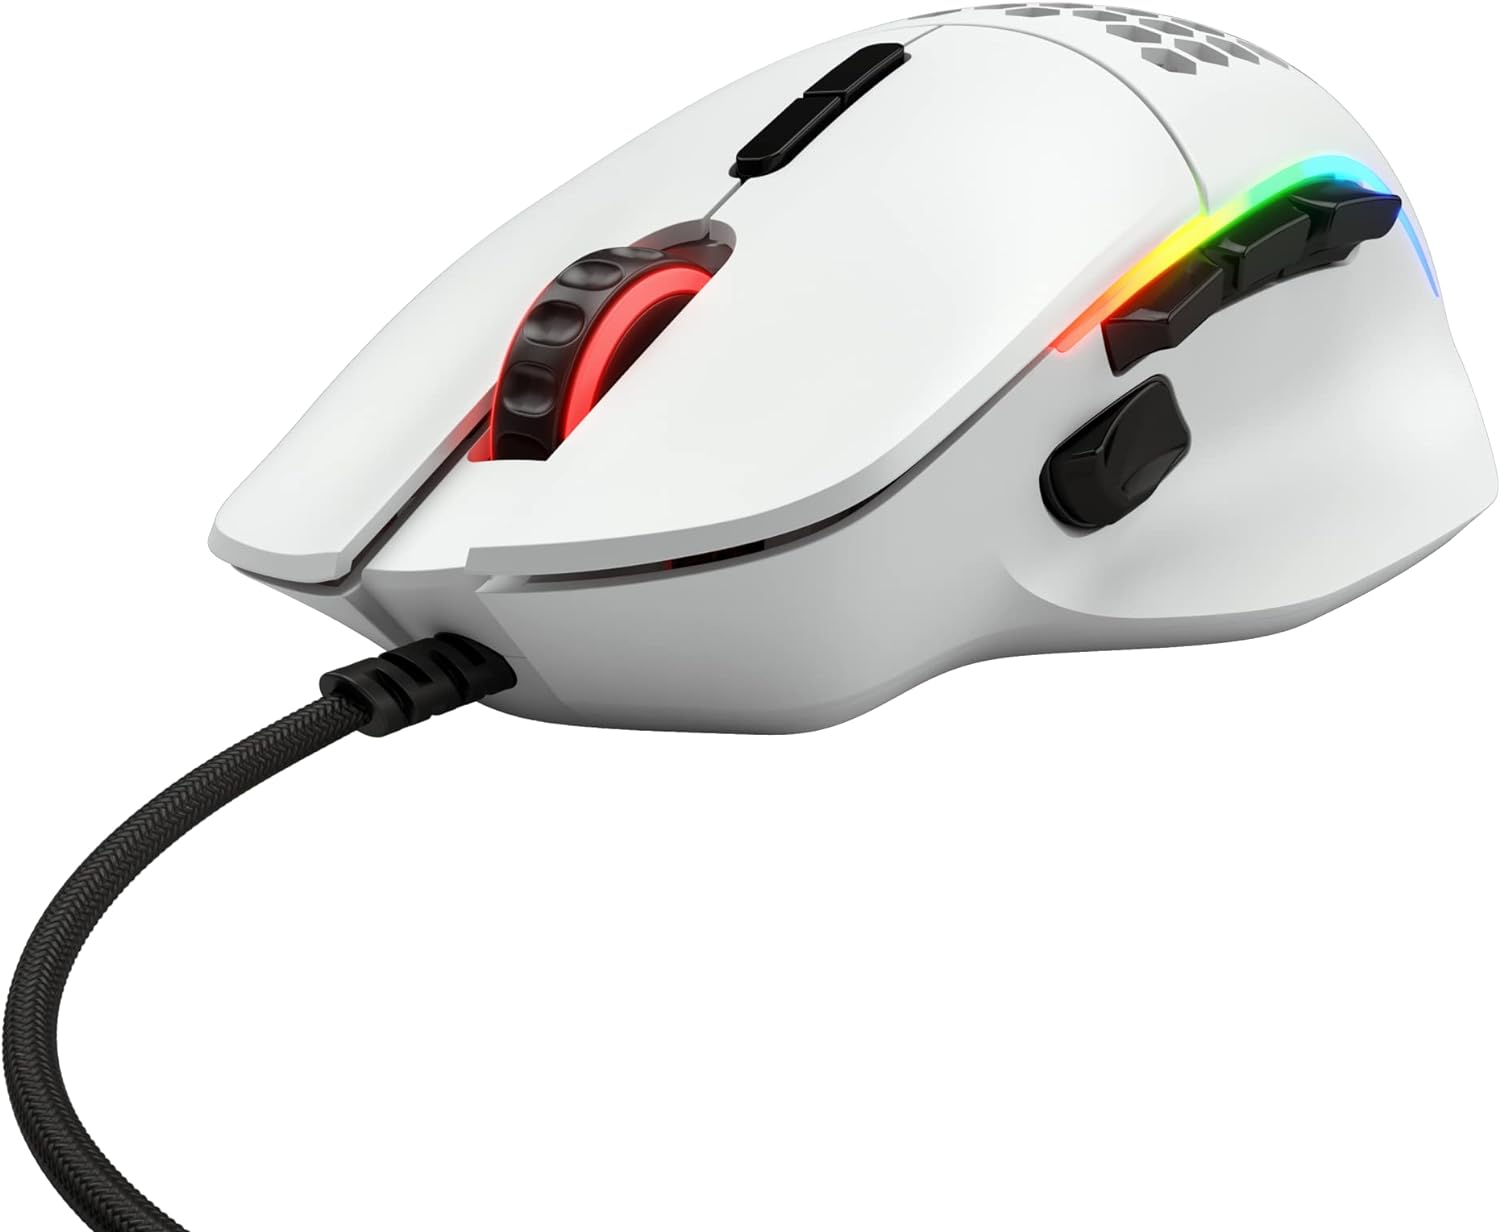 Glorious Model I Ergonomic Matte White Gaming Mouse: Built for speed, control, and comfort with ultra-flexible braided cable. 0810069970462